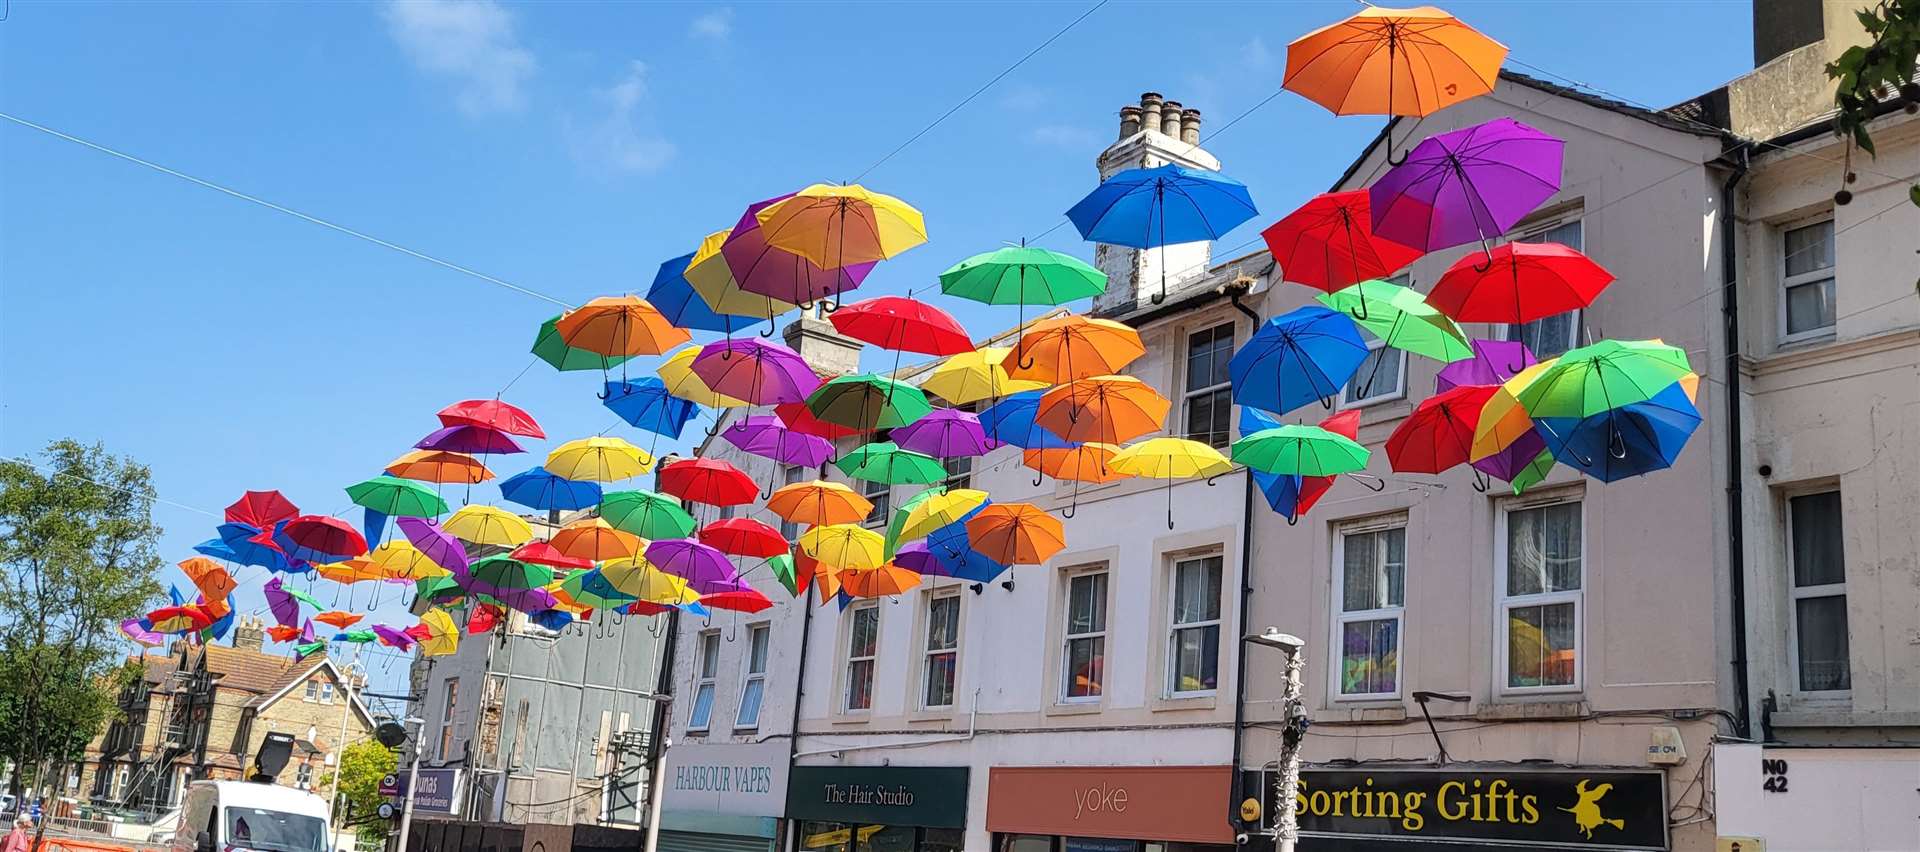 Folkestone residents branded the umbrellas a 'waste of time and money'